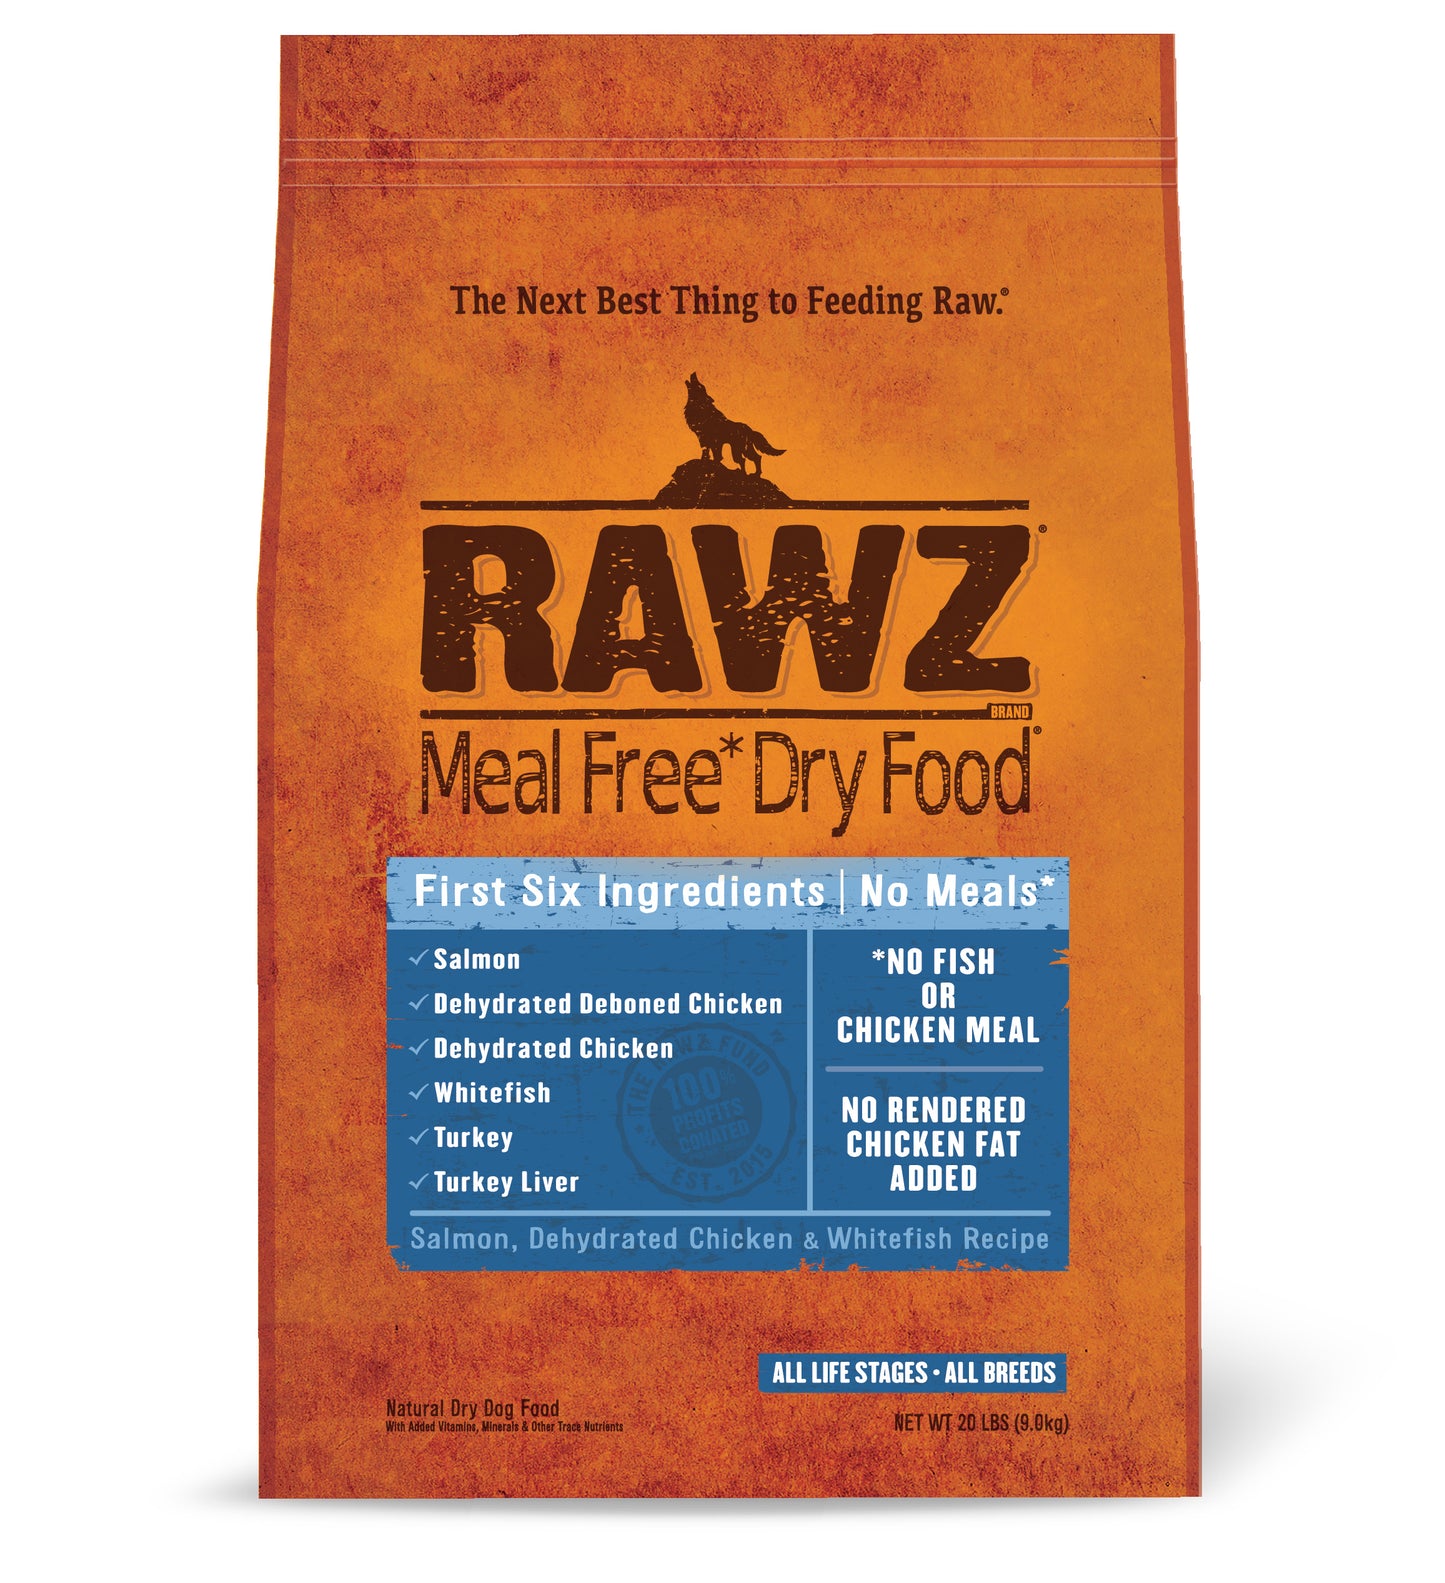 Rawz Meal Free Dehydrated Chicken, Salmon, and Whitefish